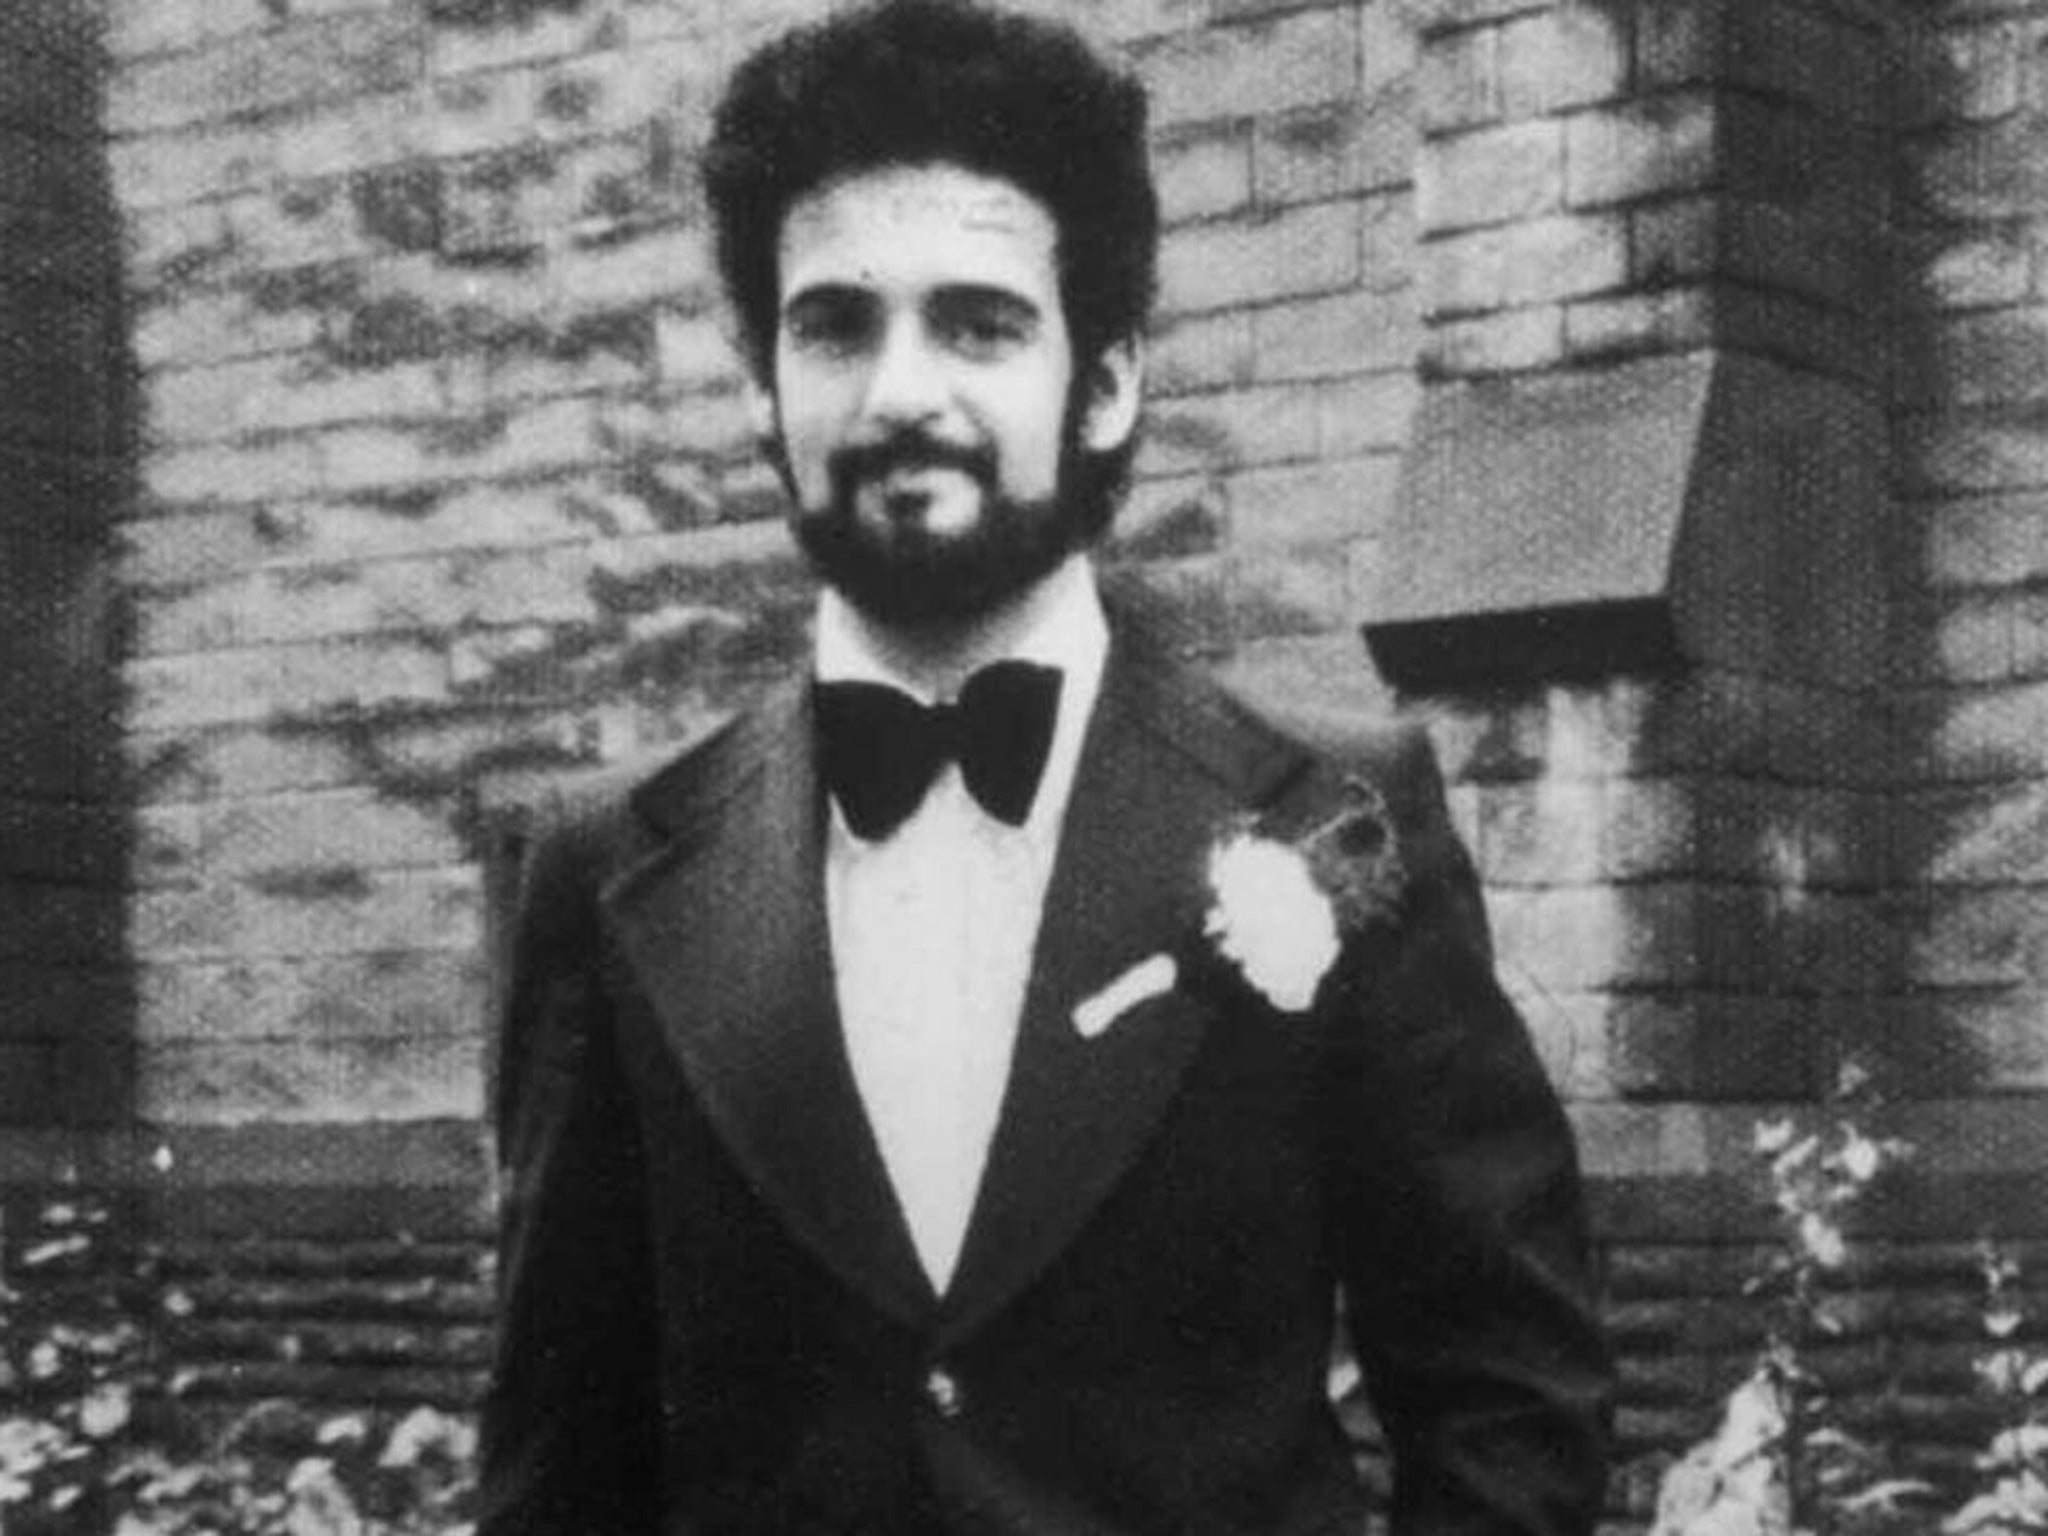 Peter Sutcliffe on his wedding day on August 10 1974